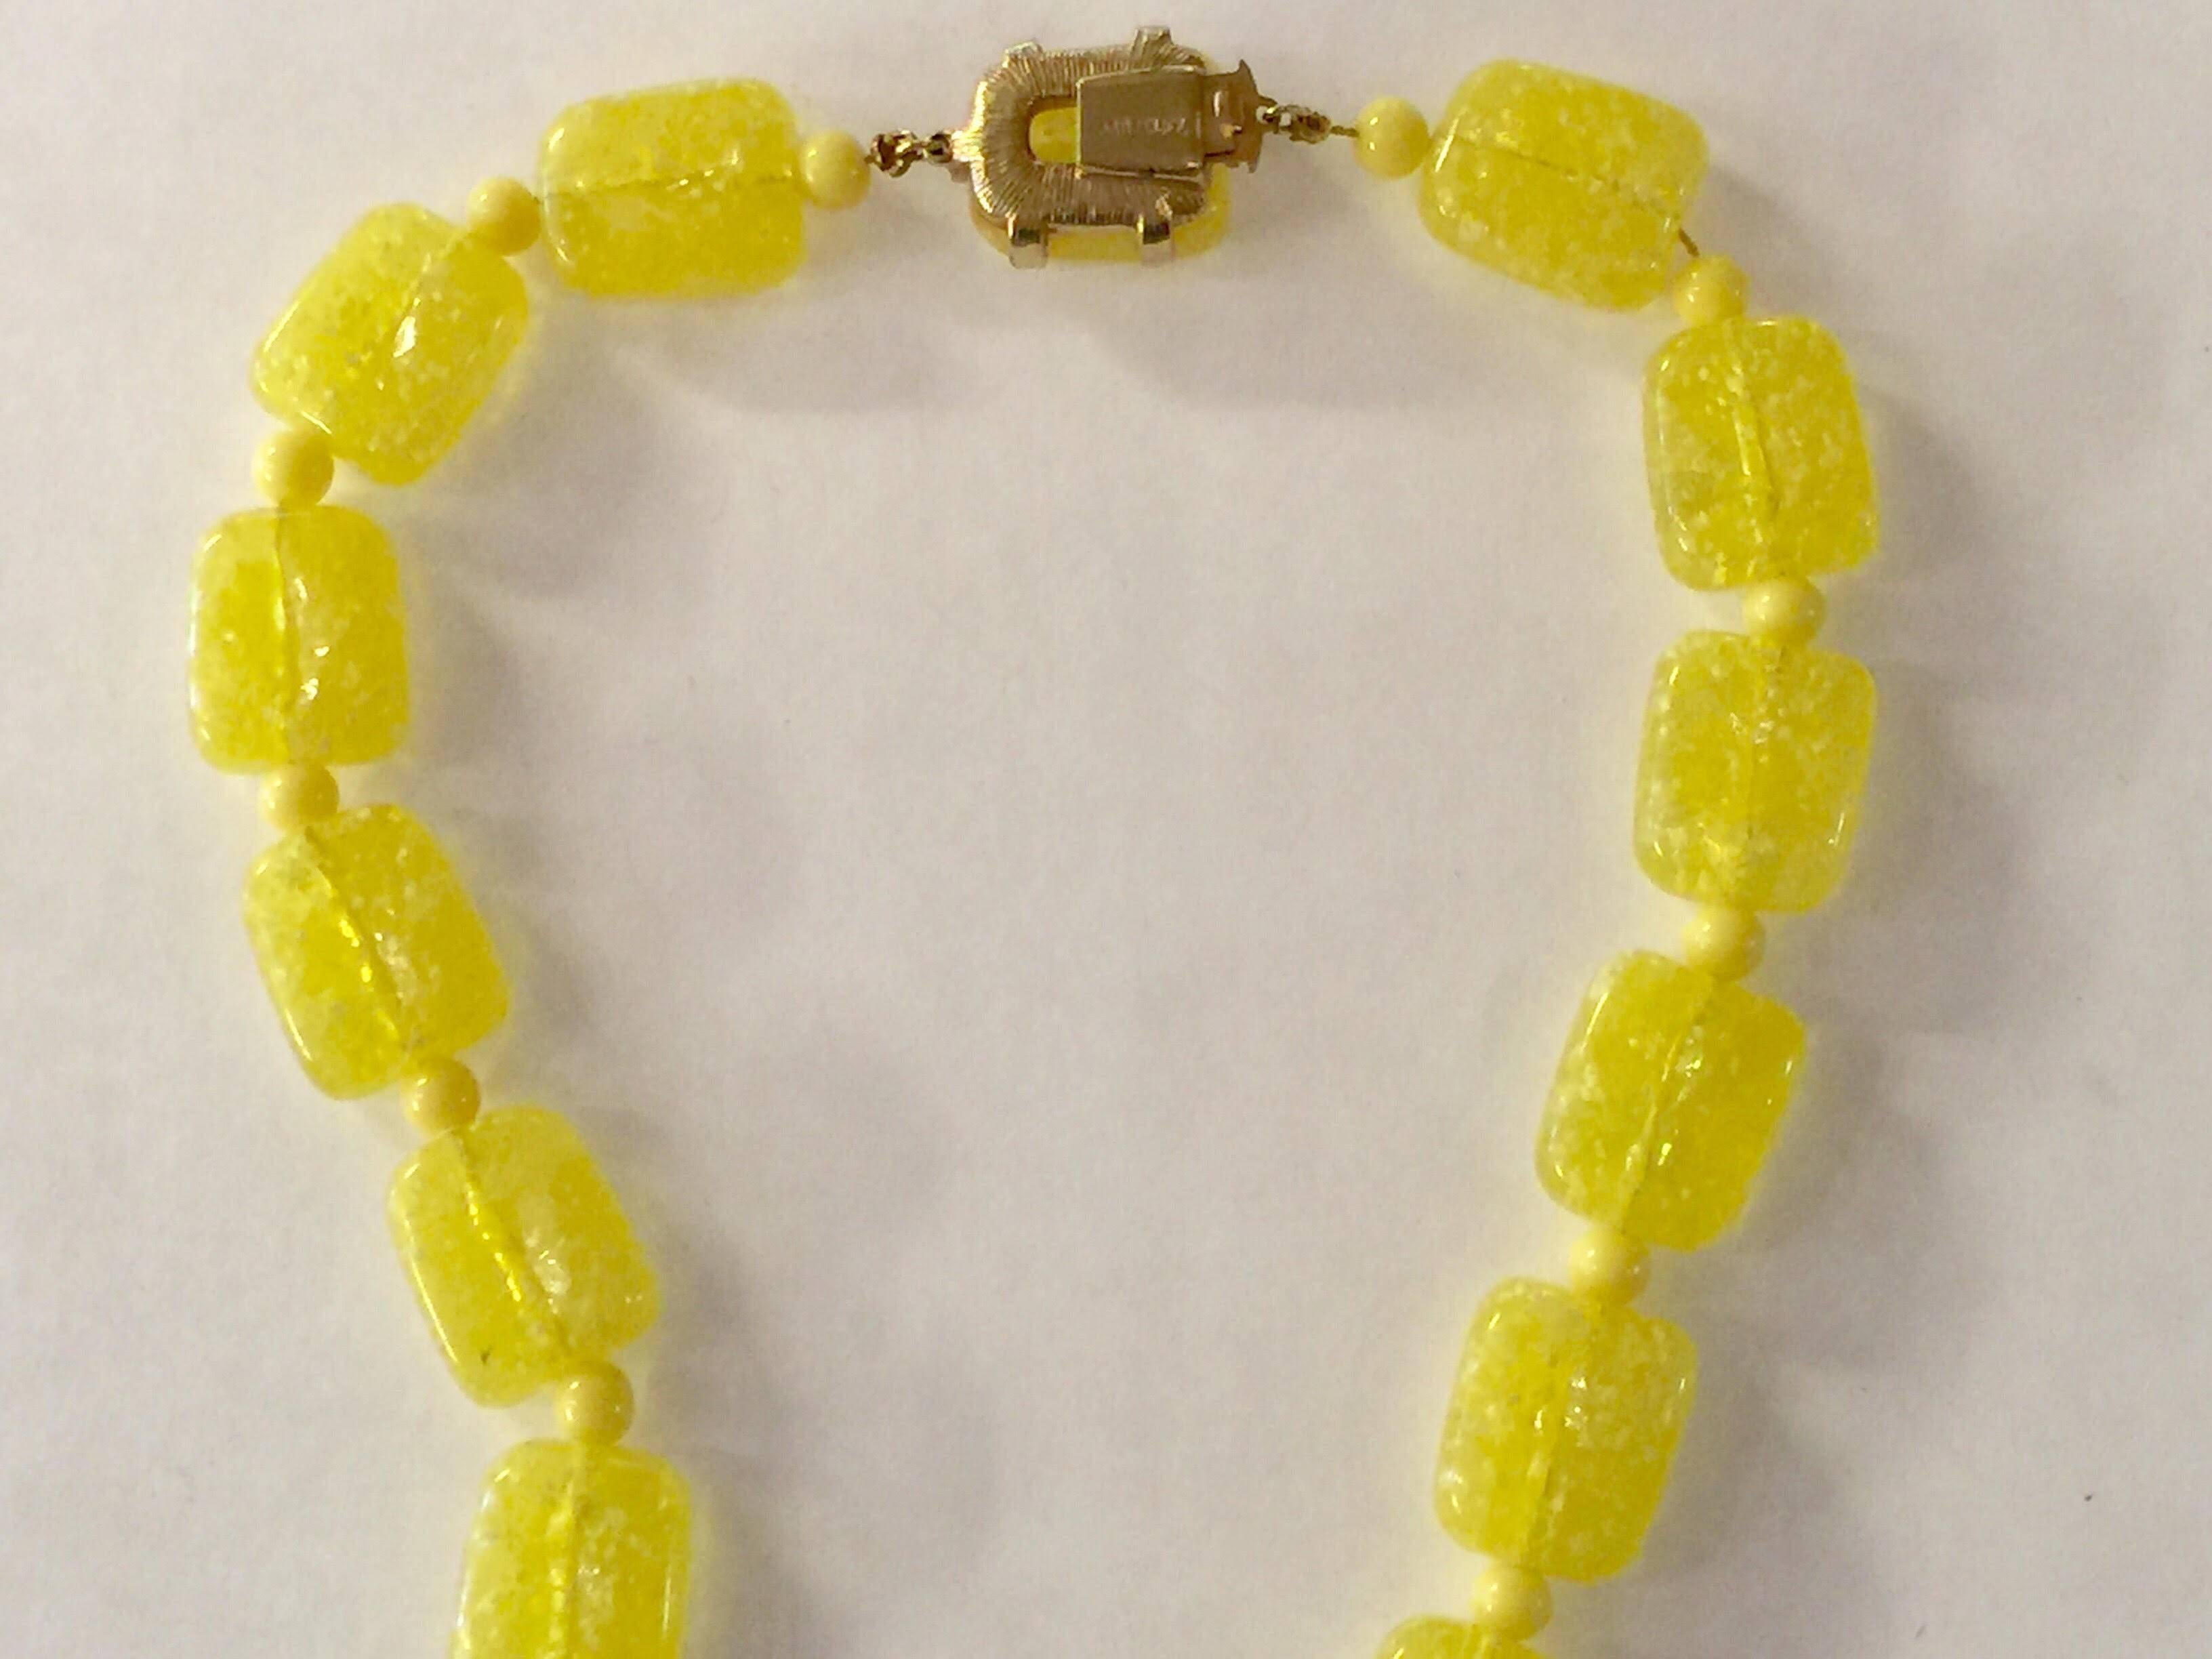  Vrba for Castlecliff Yellow and Pink Composite Resin Pendant Necklace  6